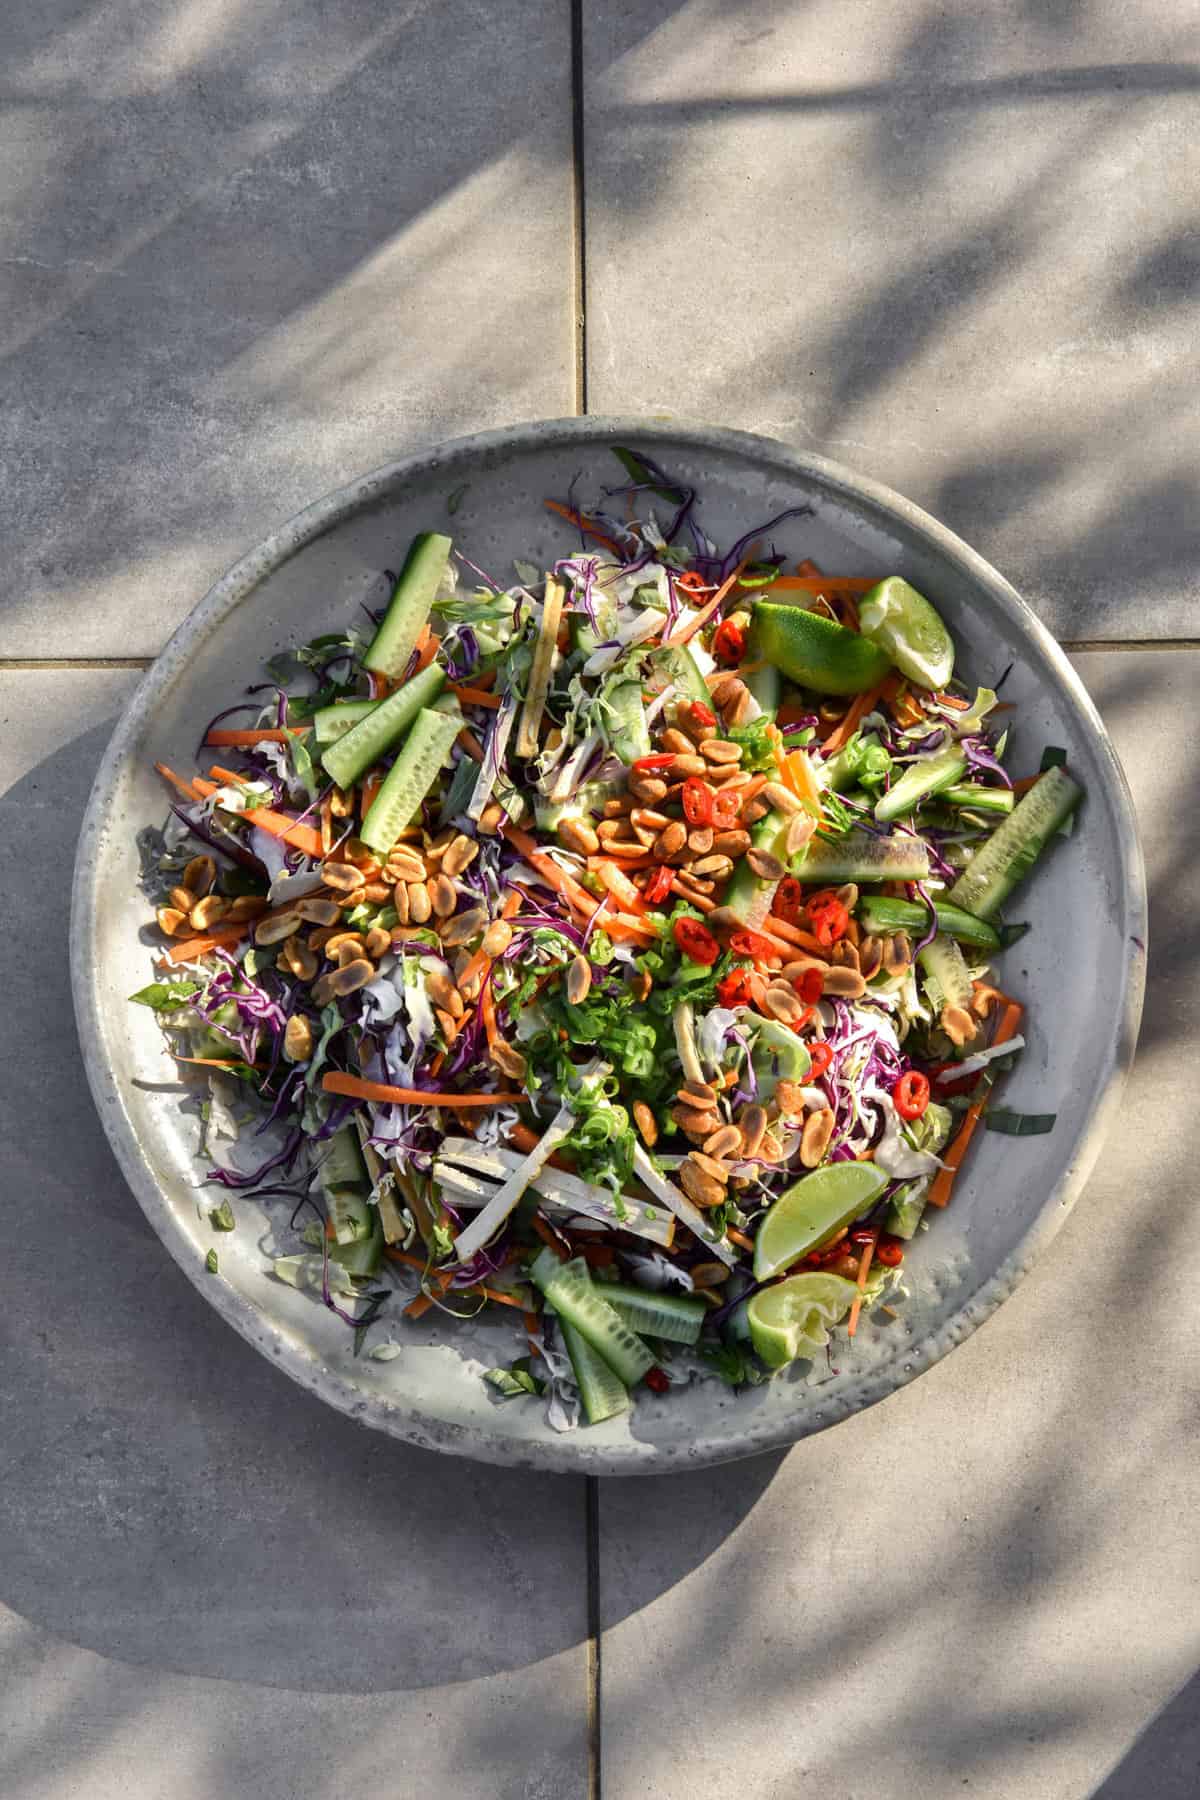 An aerial view of a Vegan Vietnamese coleslaw salad, topped with lots of peanuts, chilli and spring onion greens. The serving platter is on grey tiles in dappled sunlight